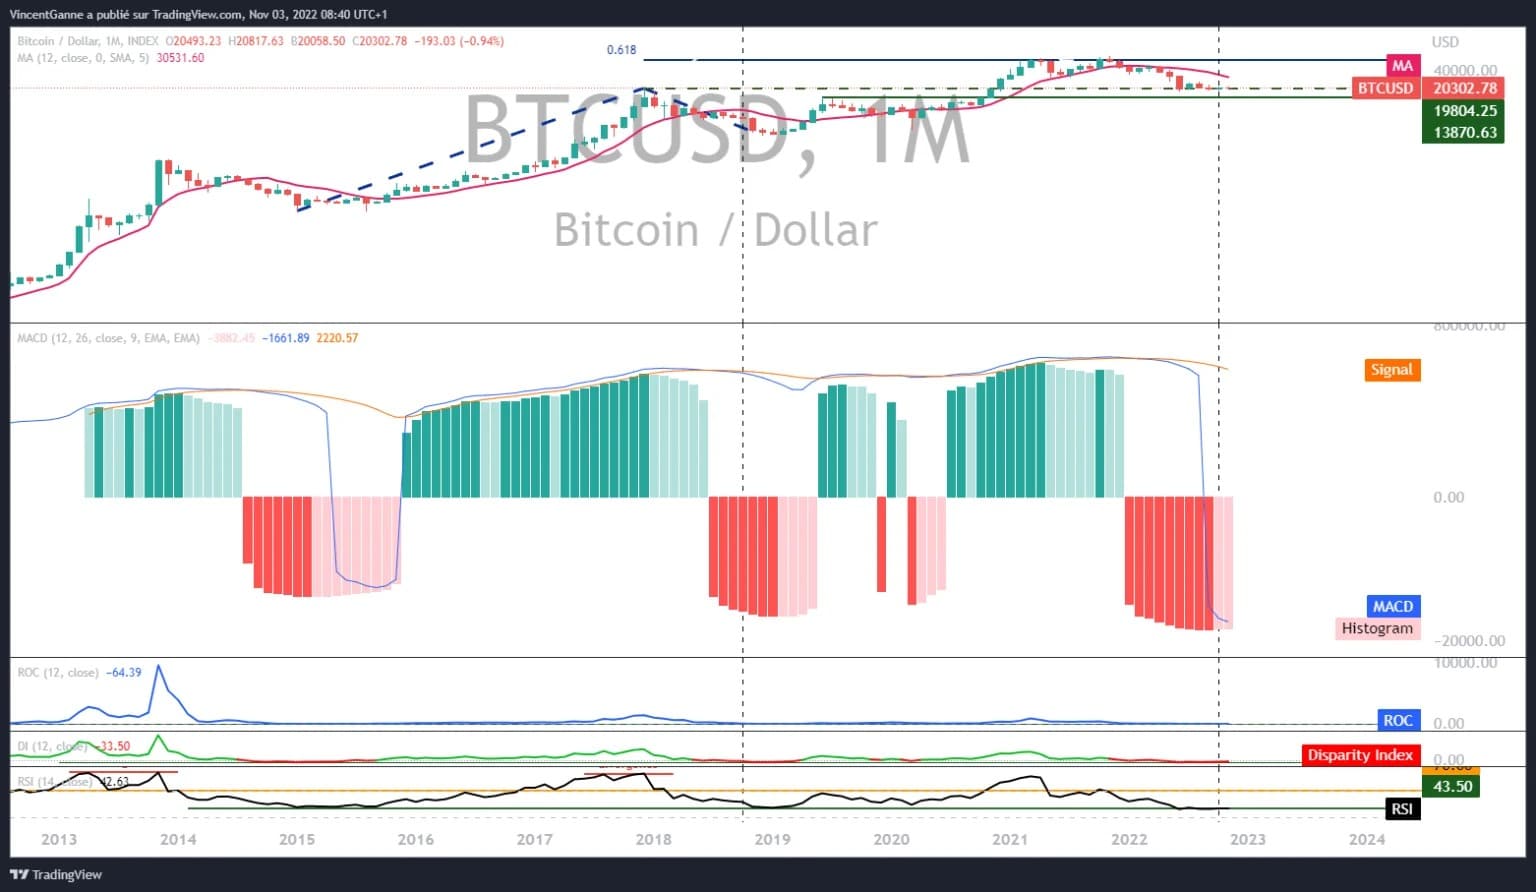 Bitcoin price (monthly) with a zoom on the MACD technical indicator over this same long time horizon